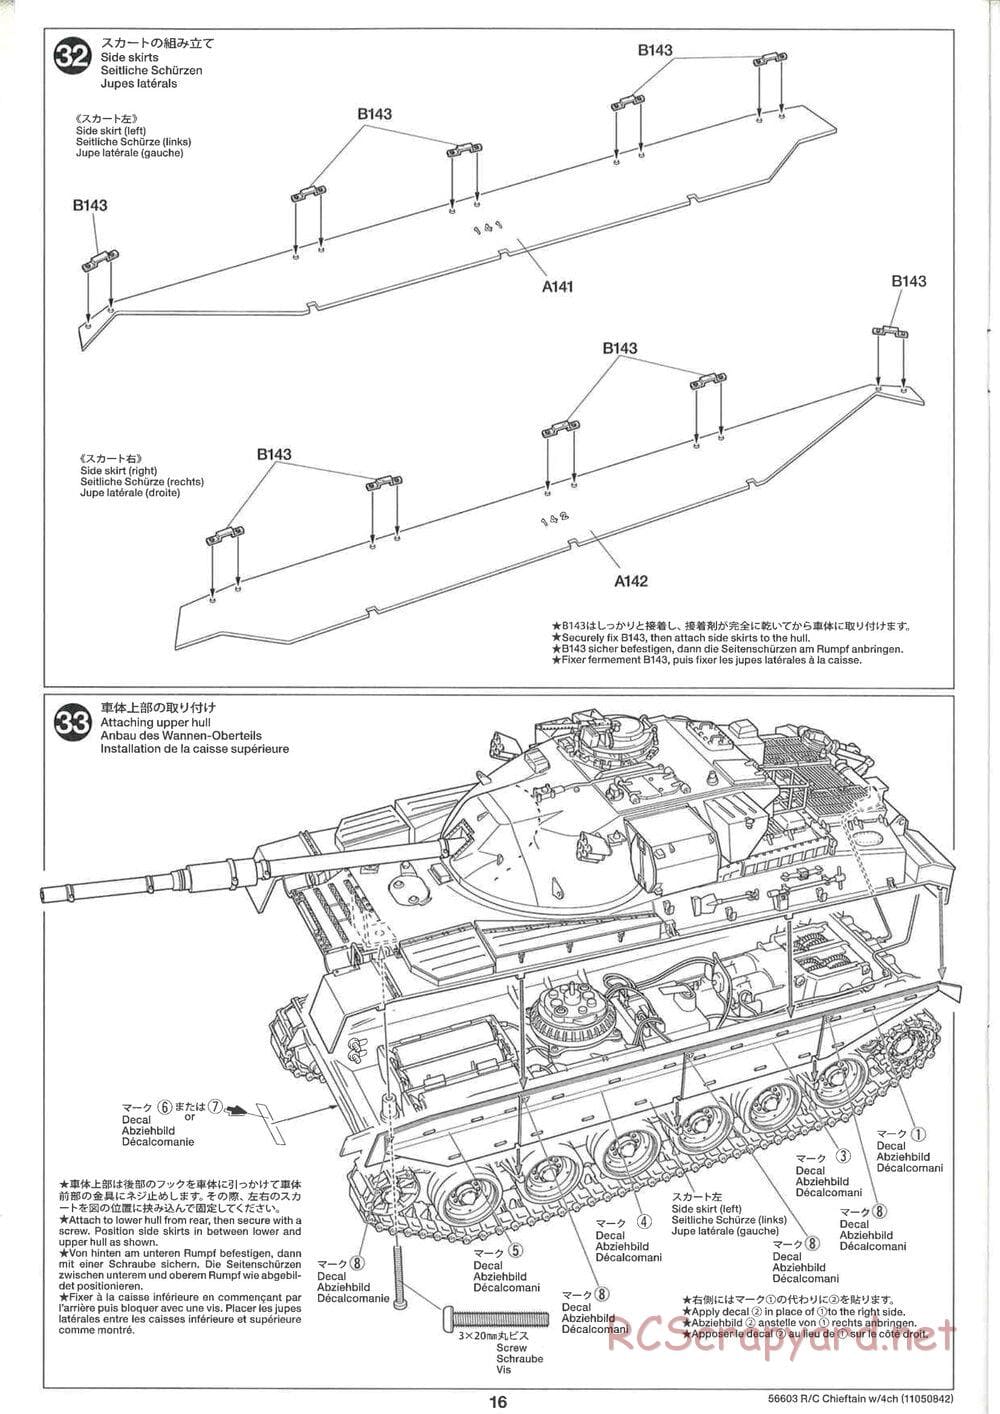 Tamiya - British Army Battle Tank Cheiftain - 1/25 Scale Chassis - Manual - Page 16